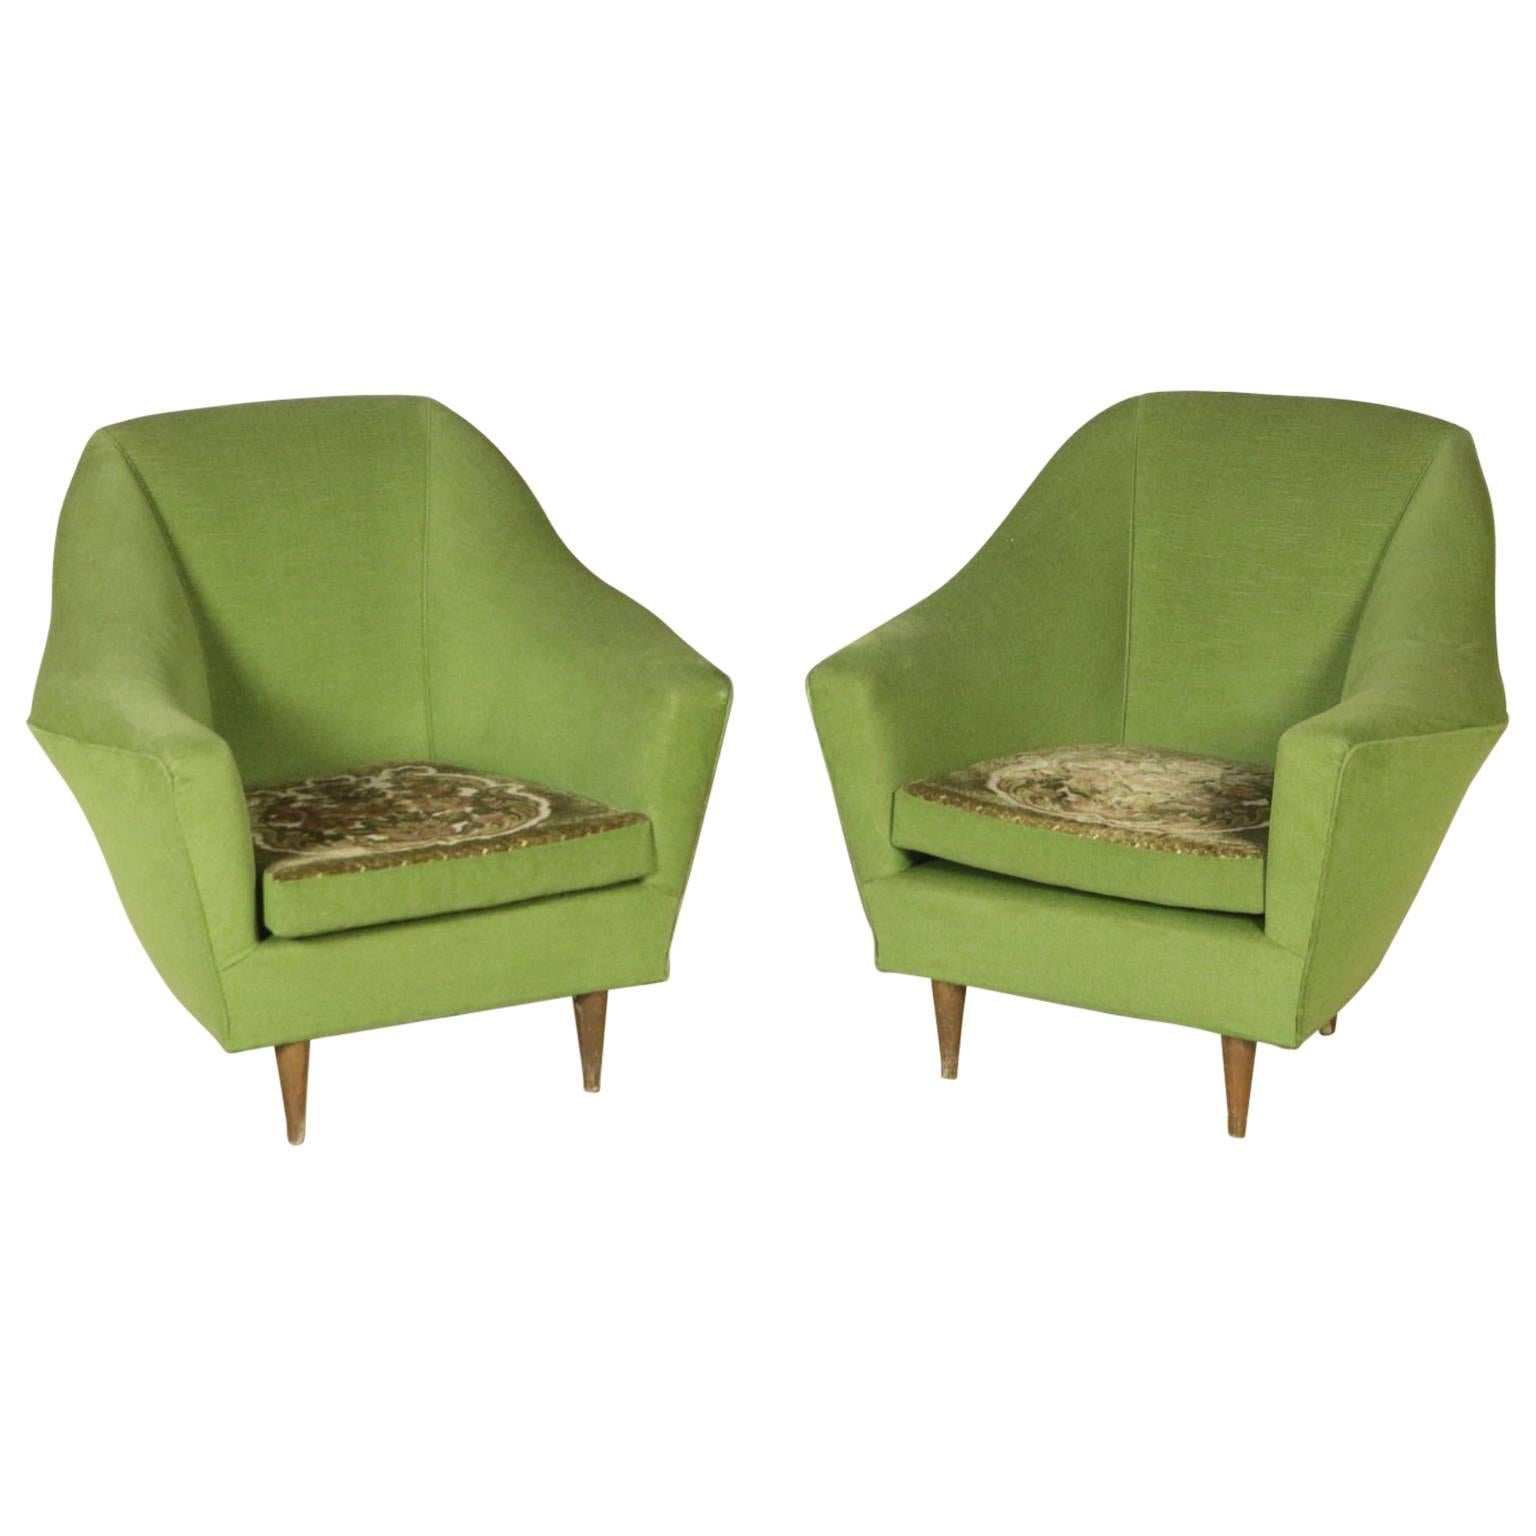 Two Armchairs Foam Velvet Double Face Cushion Vintage, Italy, 1950s